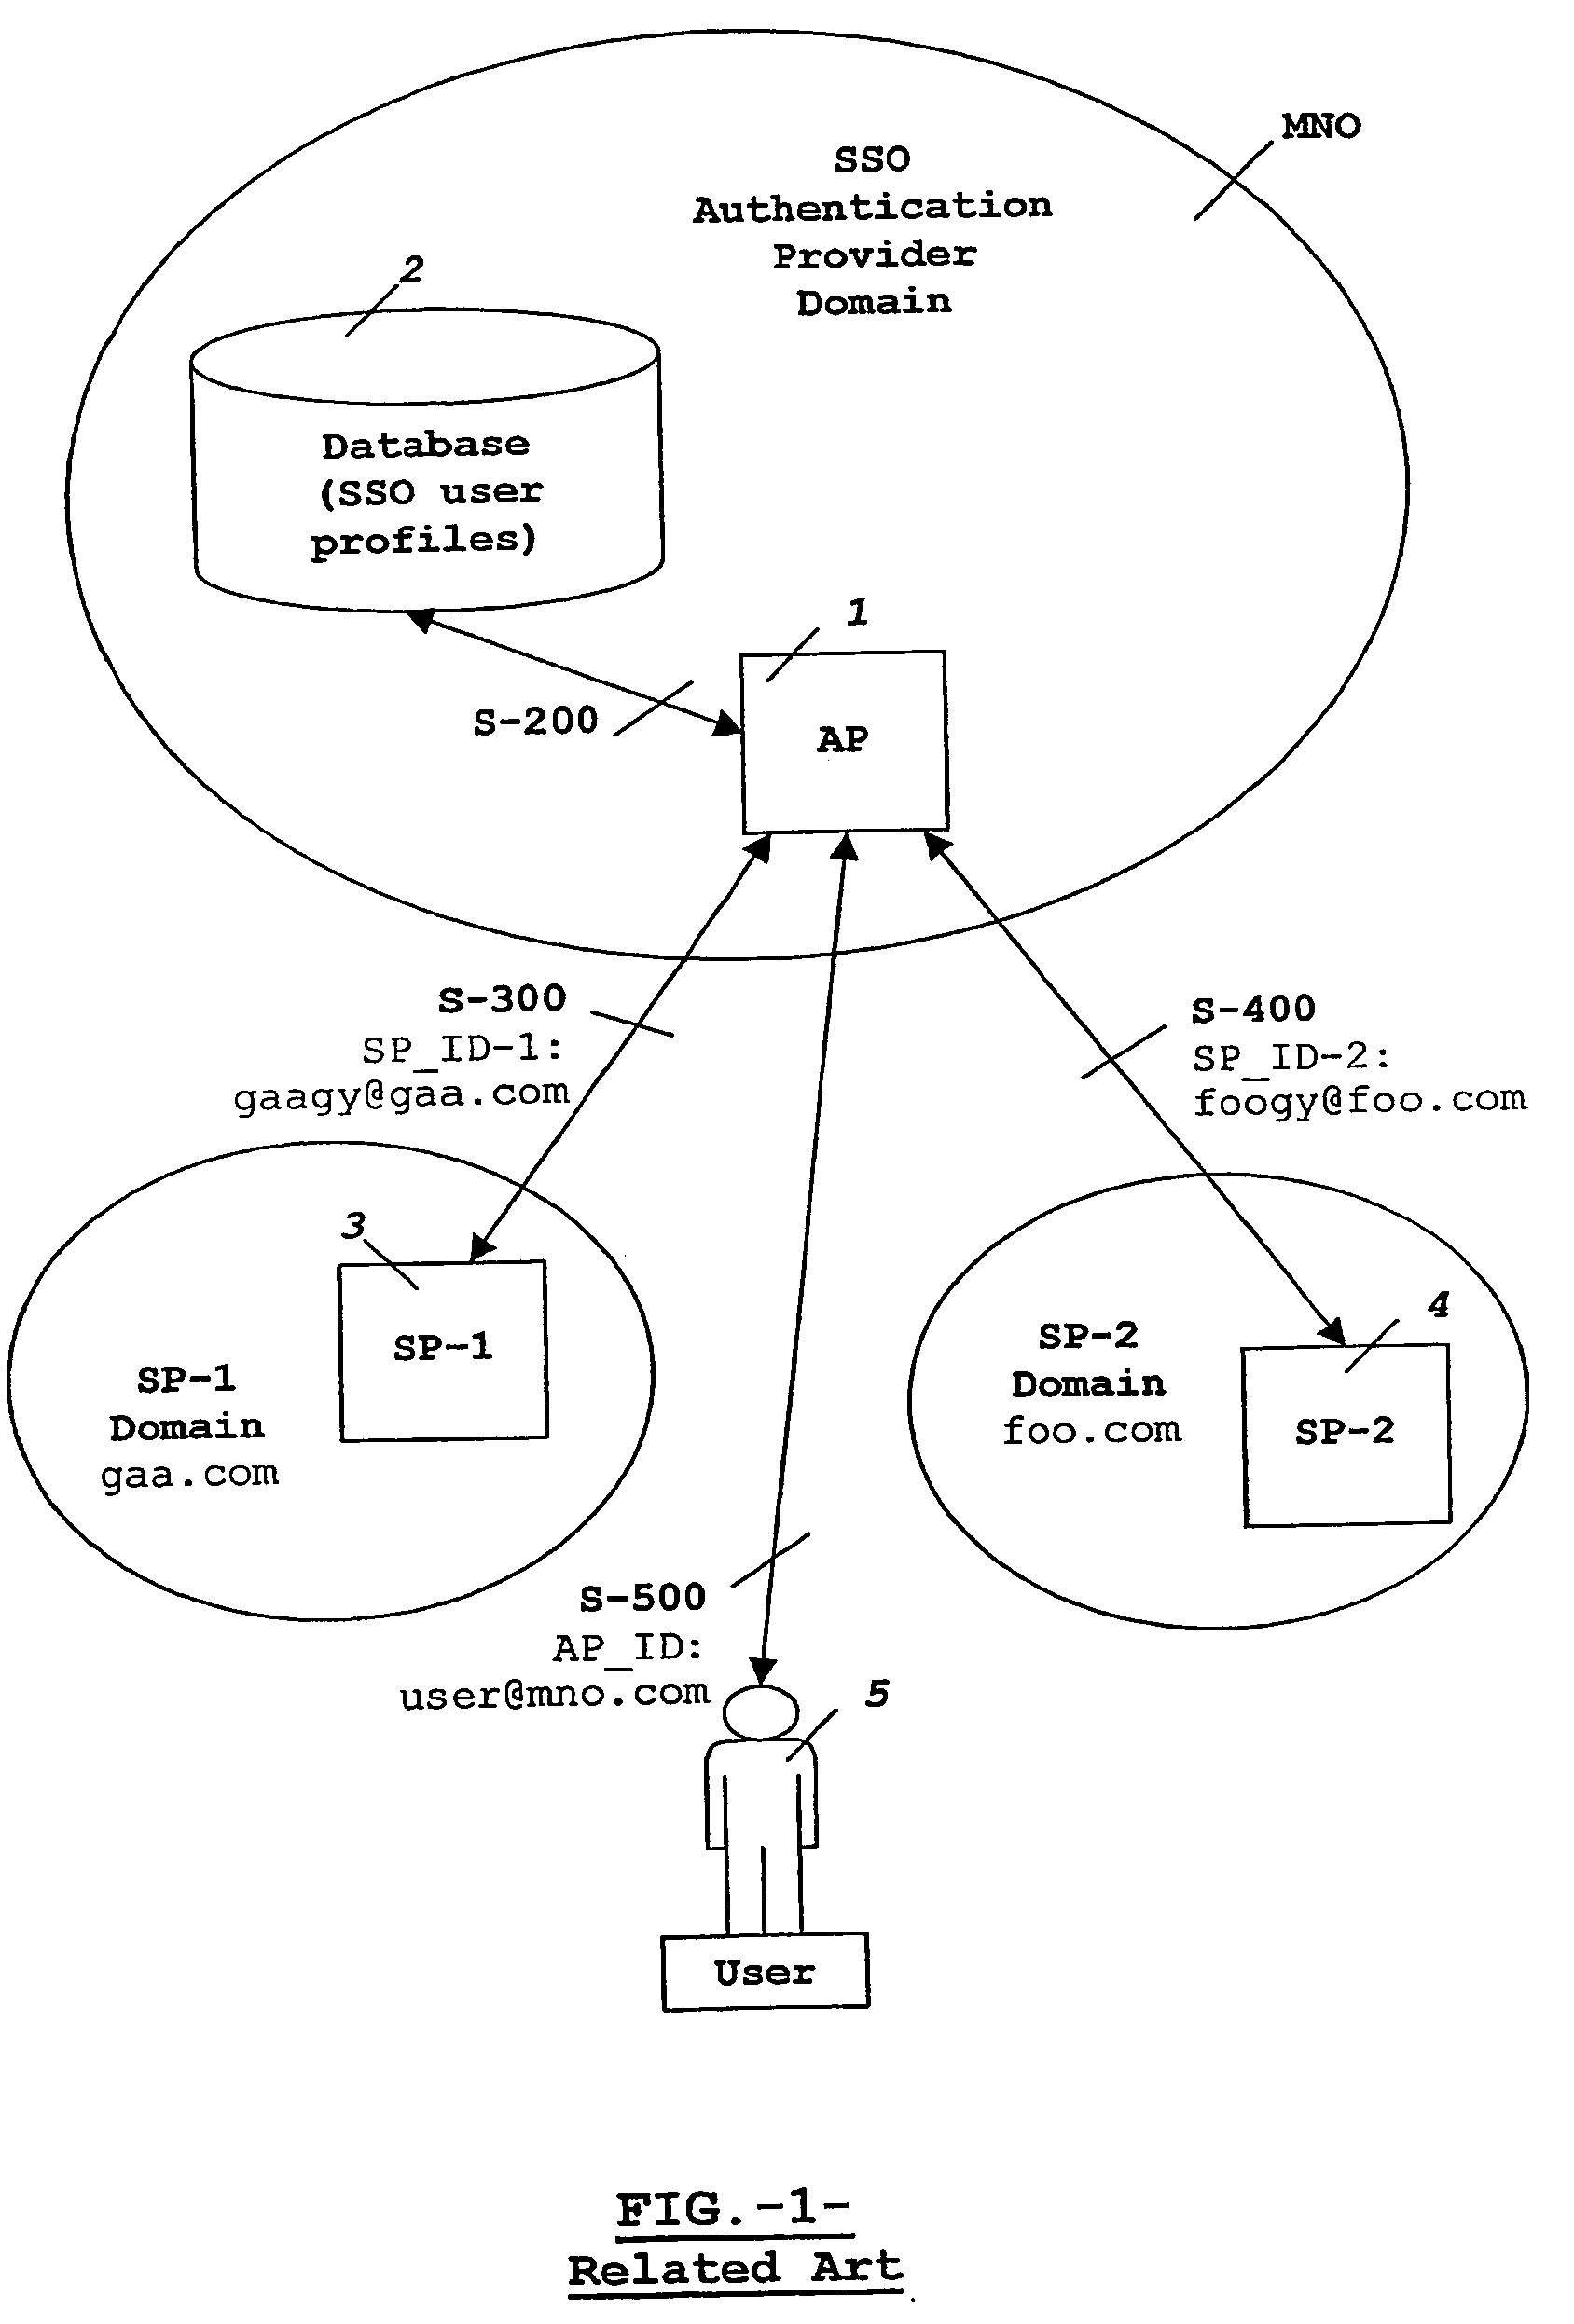 Method and apparatus for handling user identities under single sign-on services